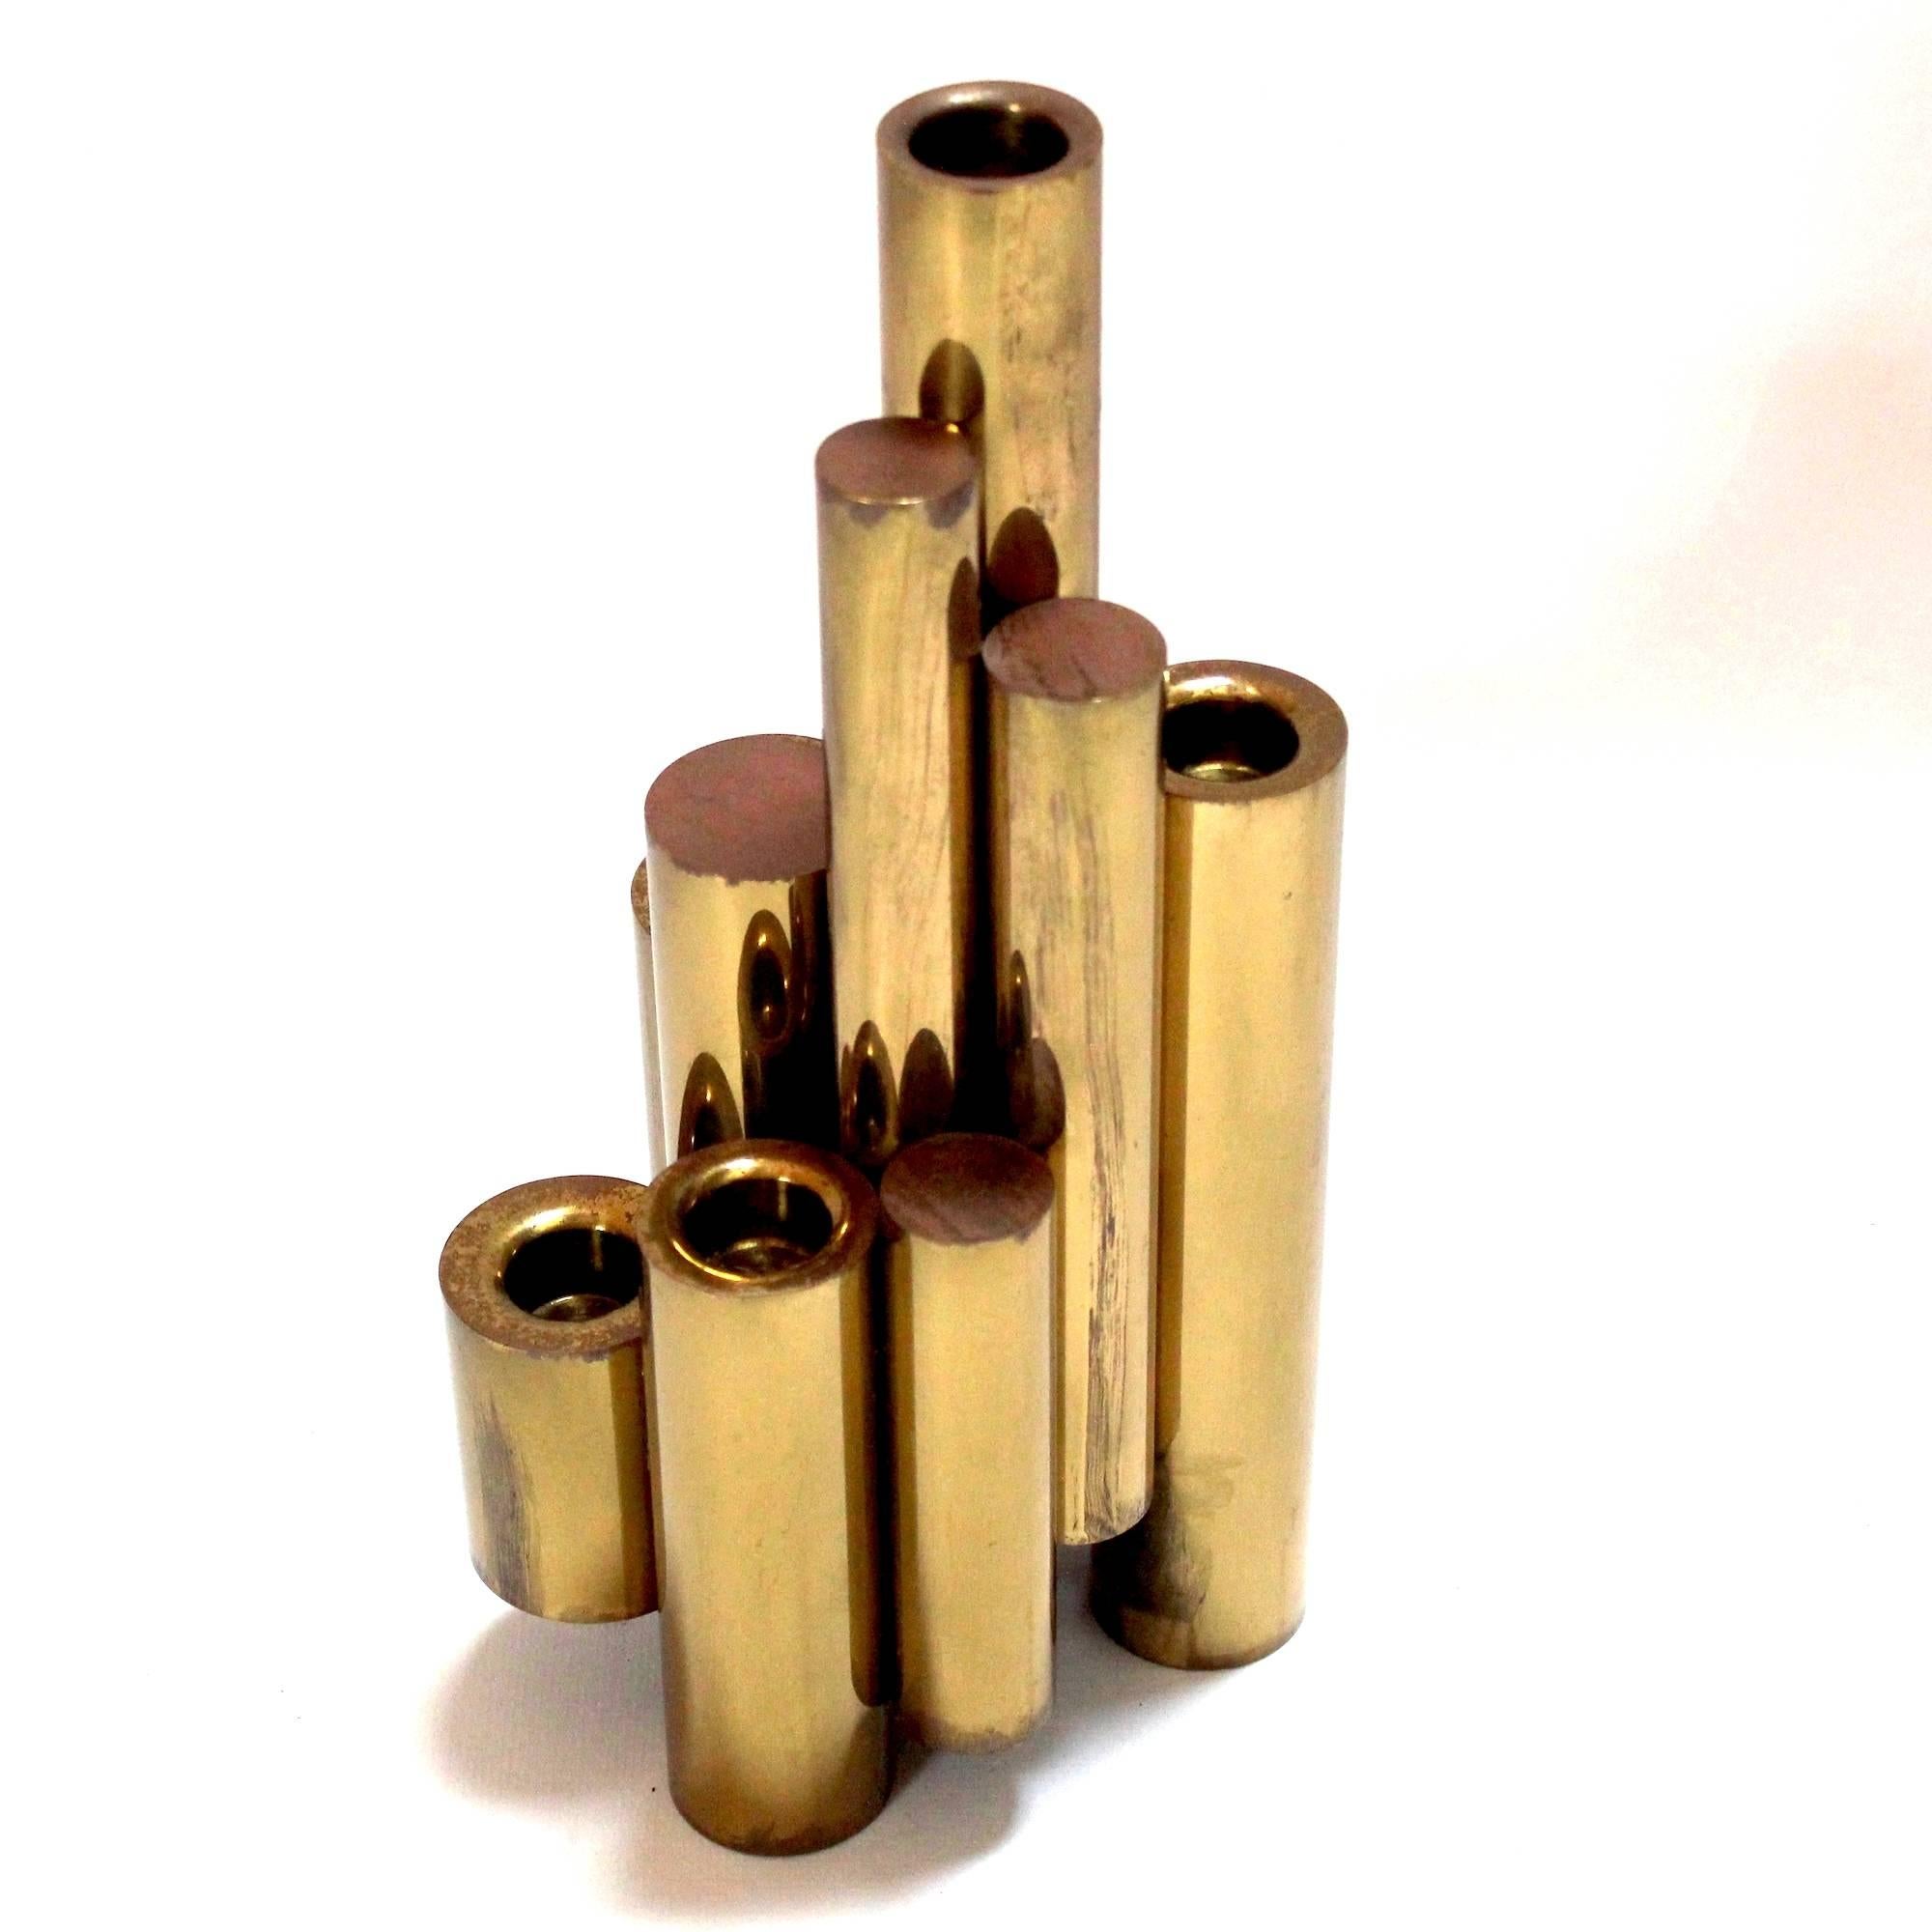 1950s tubular brass candleholder designed by Giò Ponti for Sabbatini, Italy.